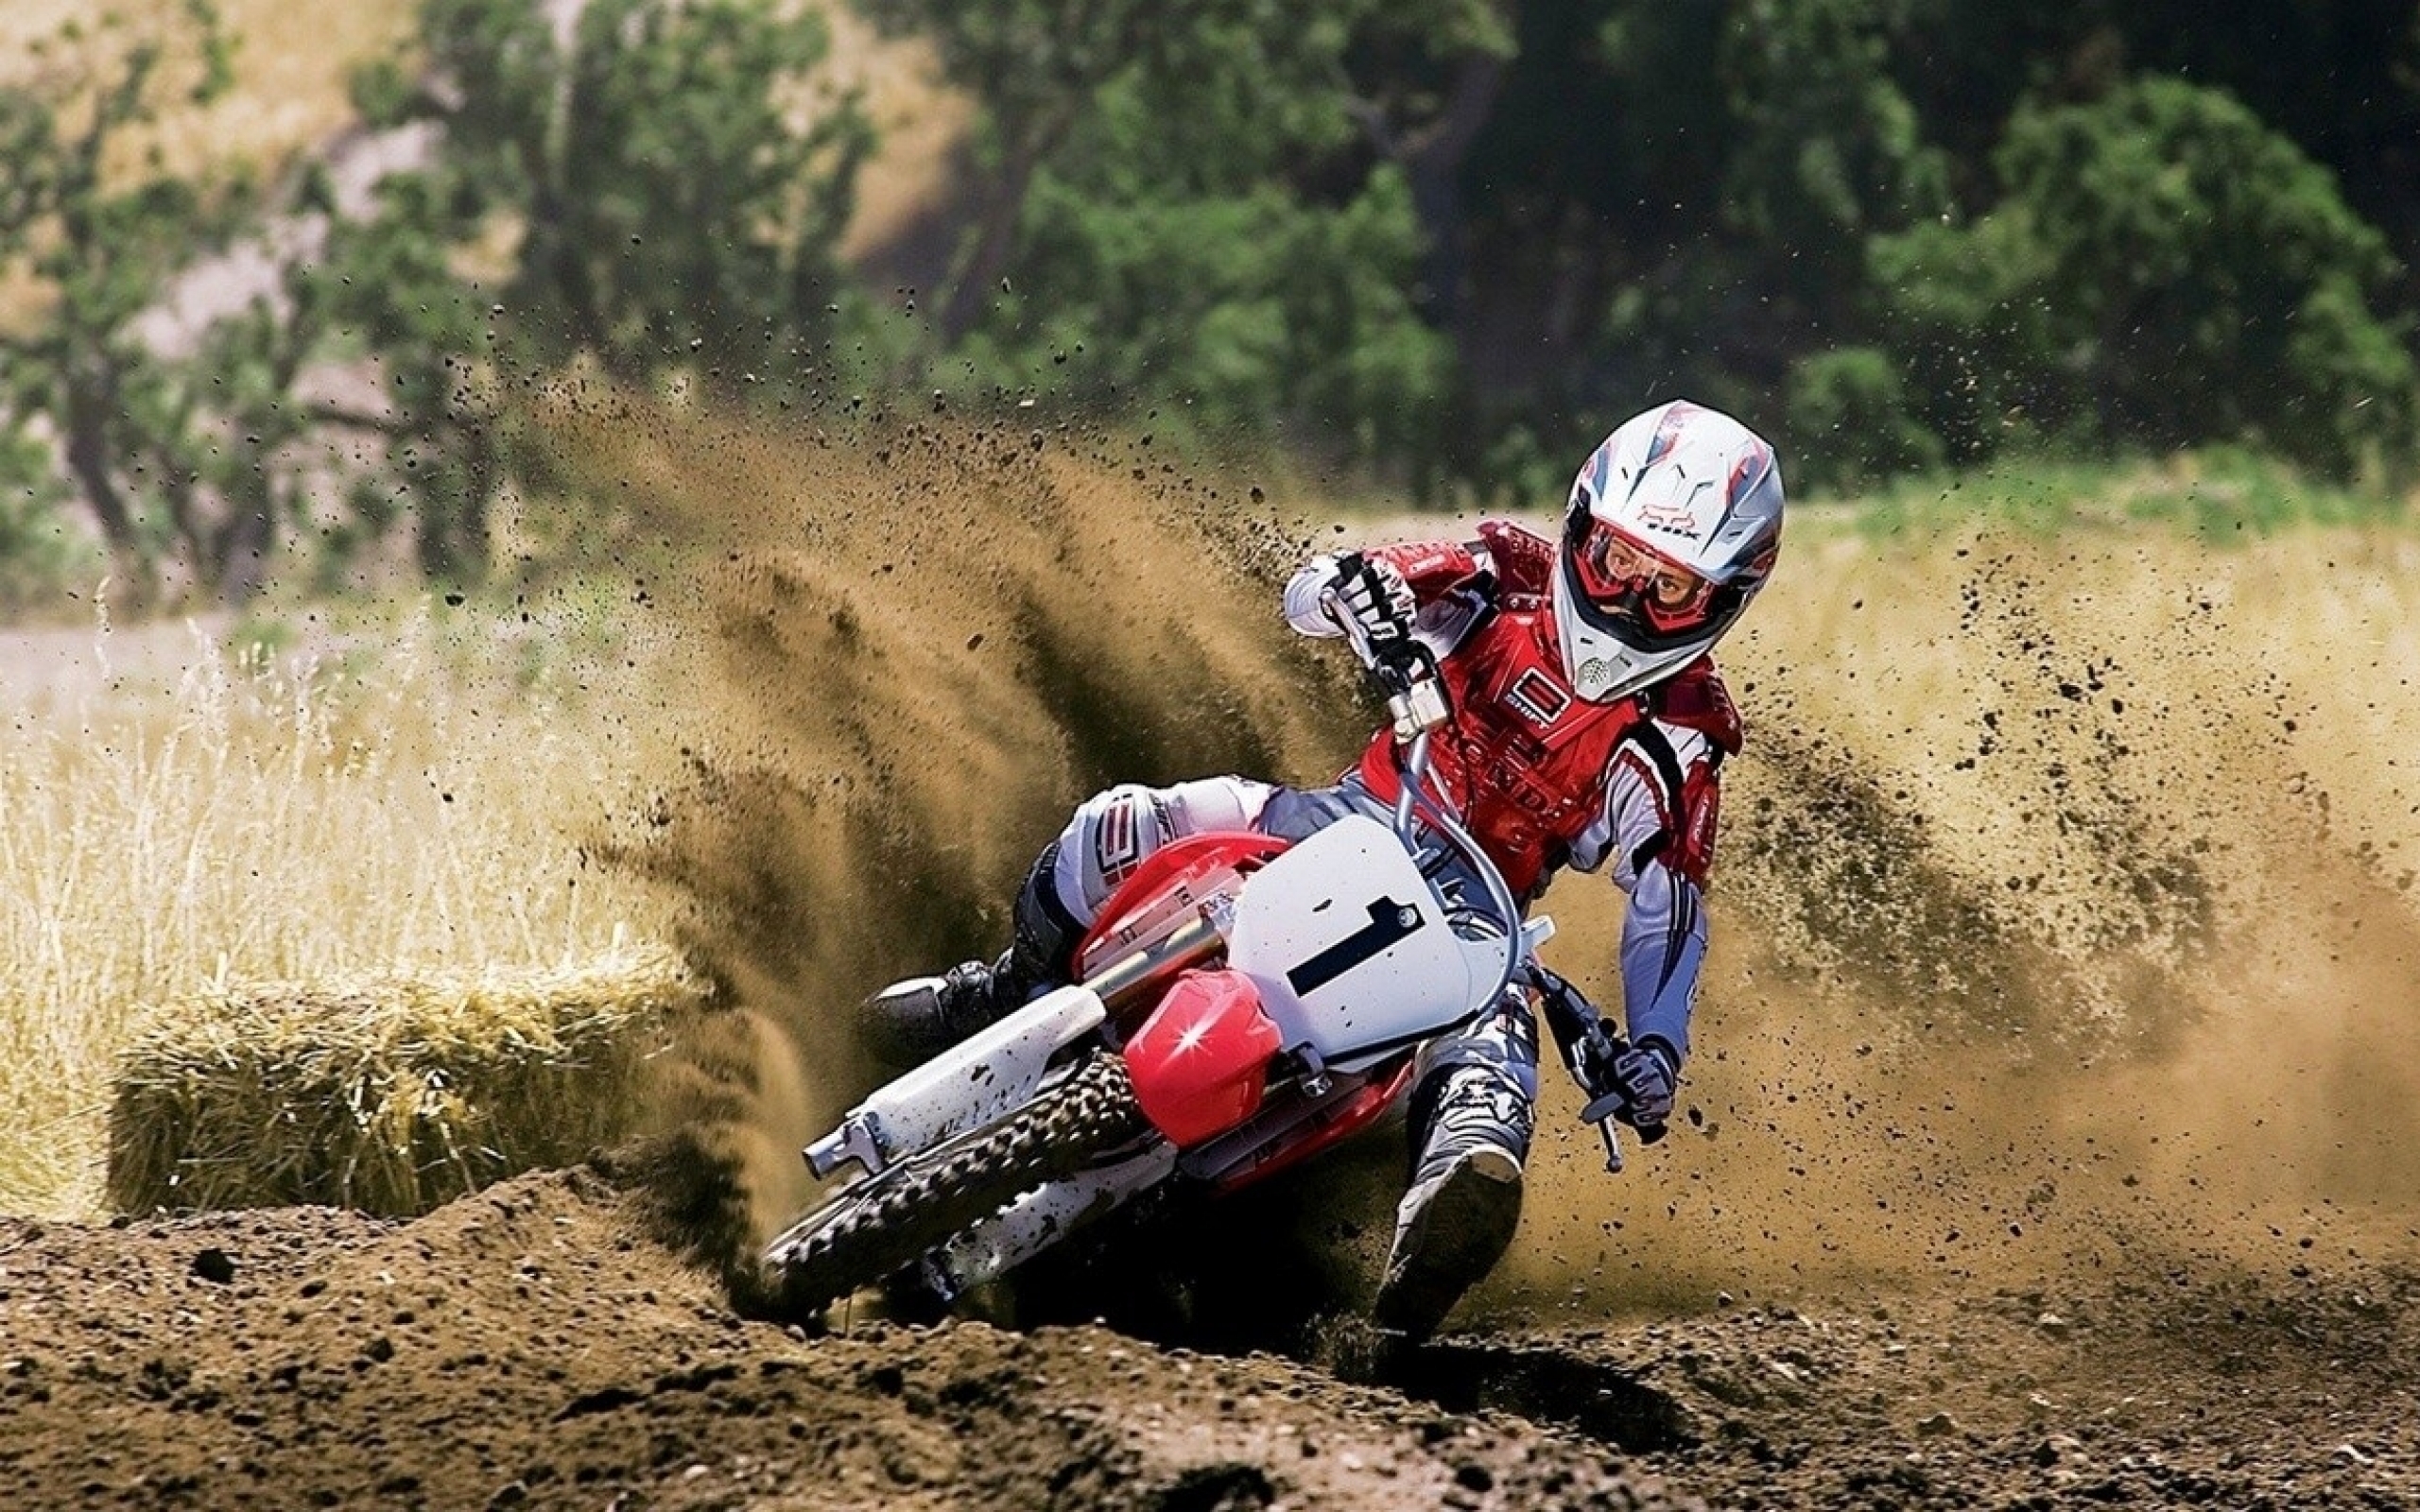 Motocross Wallpaper And Background Image 1680x1050 ID359438